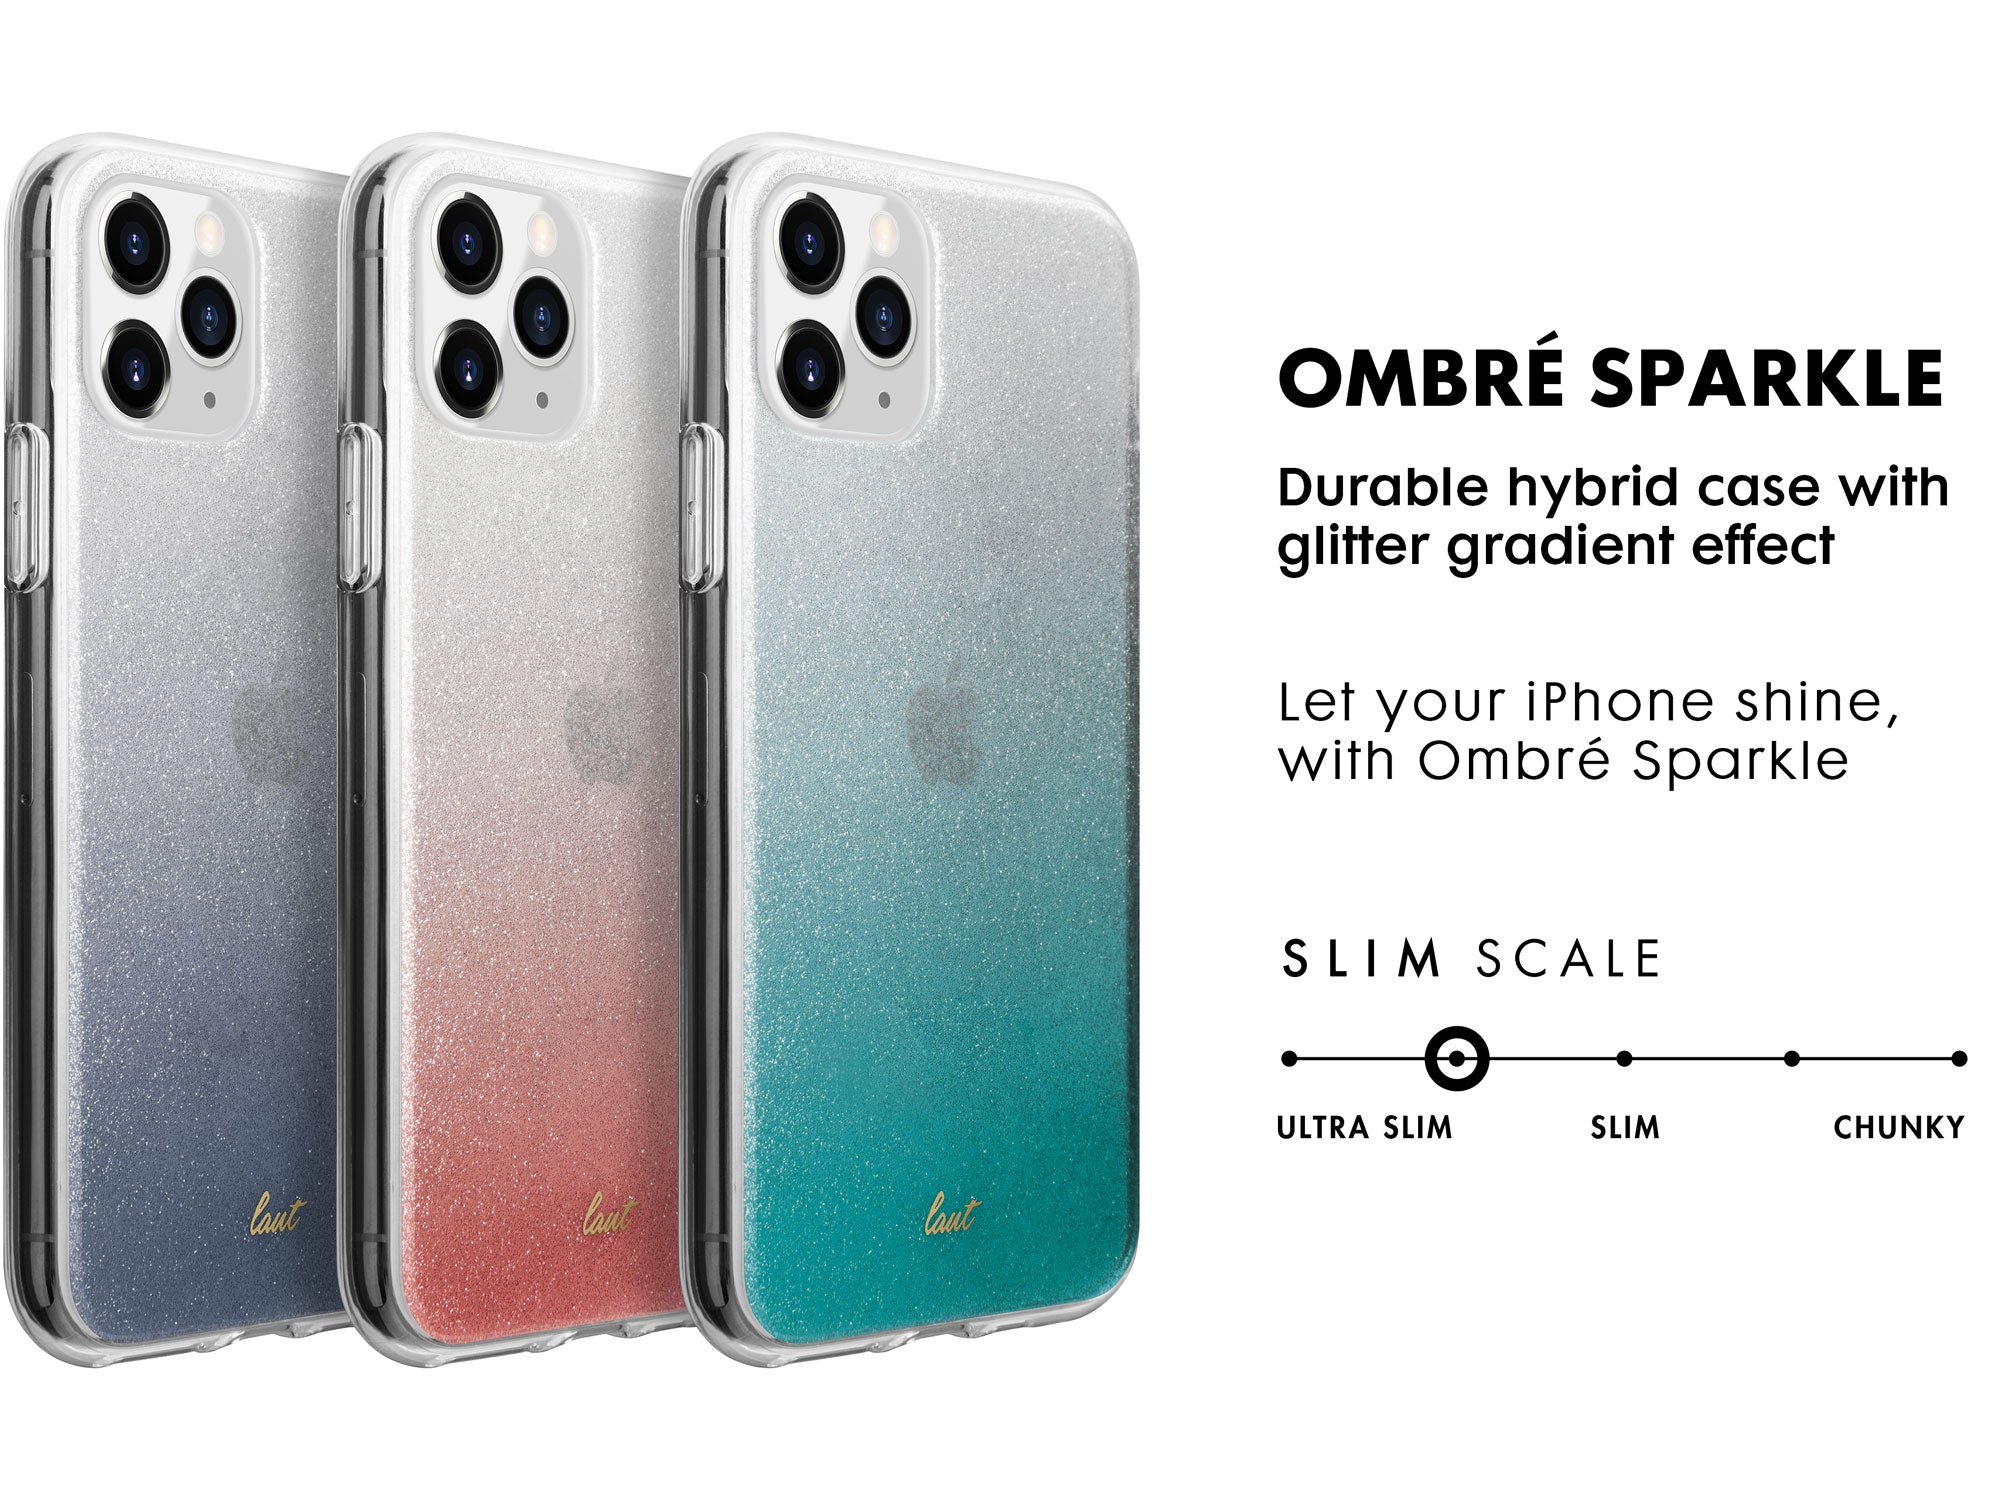 Ombre Sparkle for iPhone 11 series